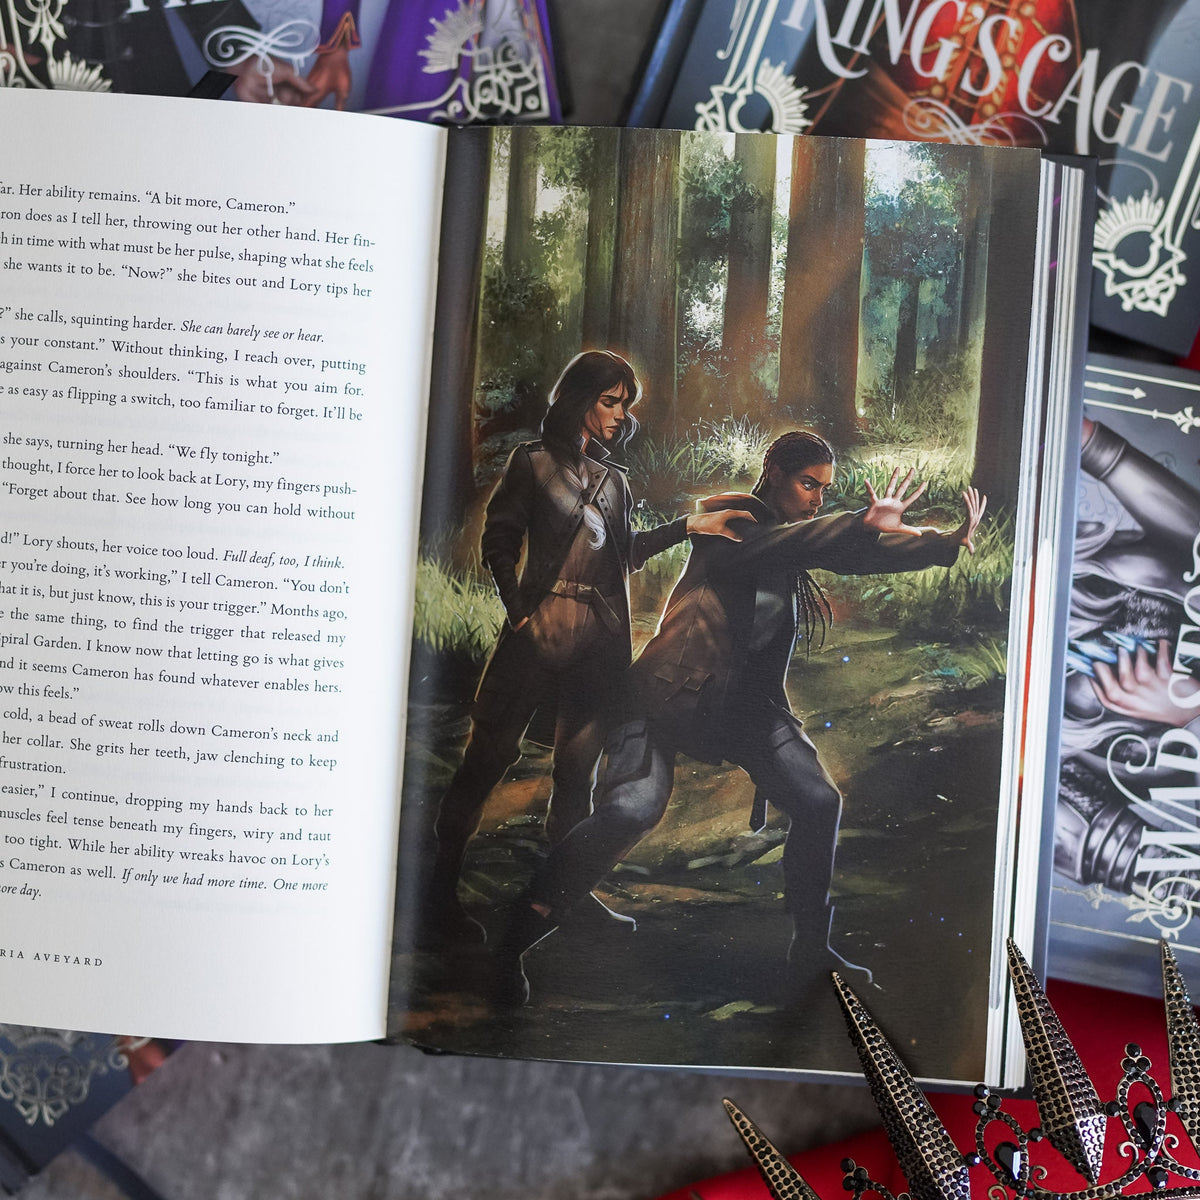 Interior artwork within the special edition books